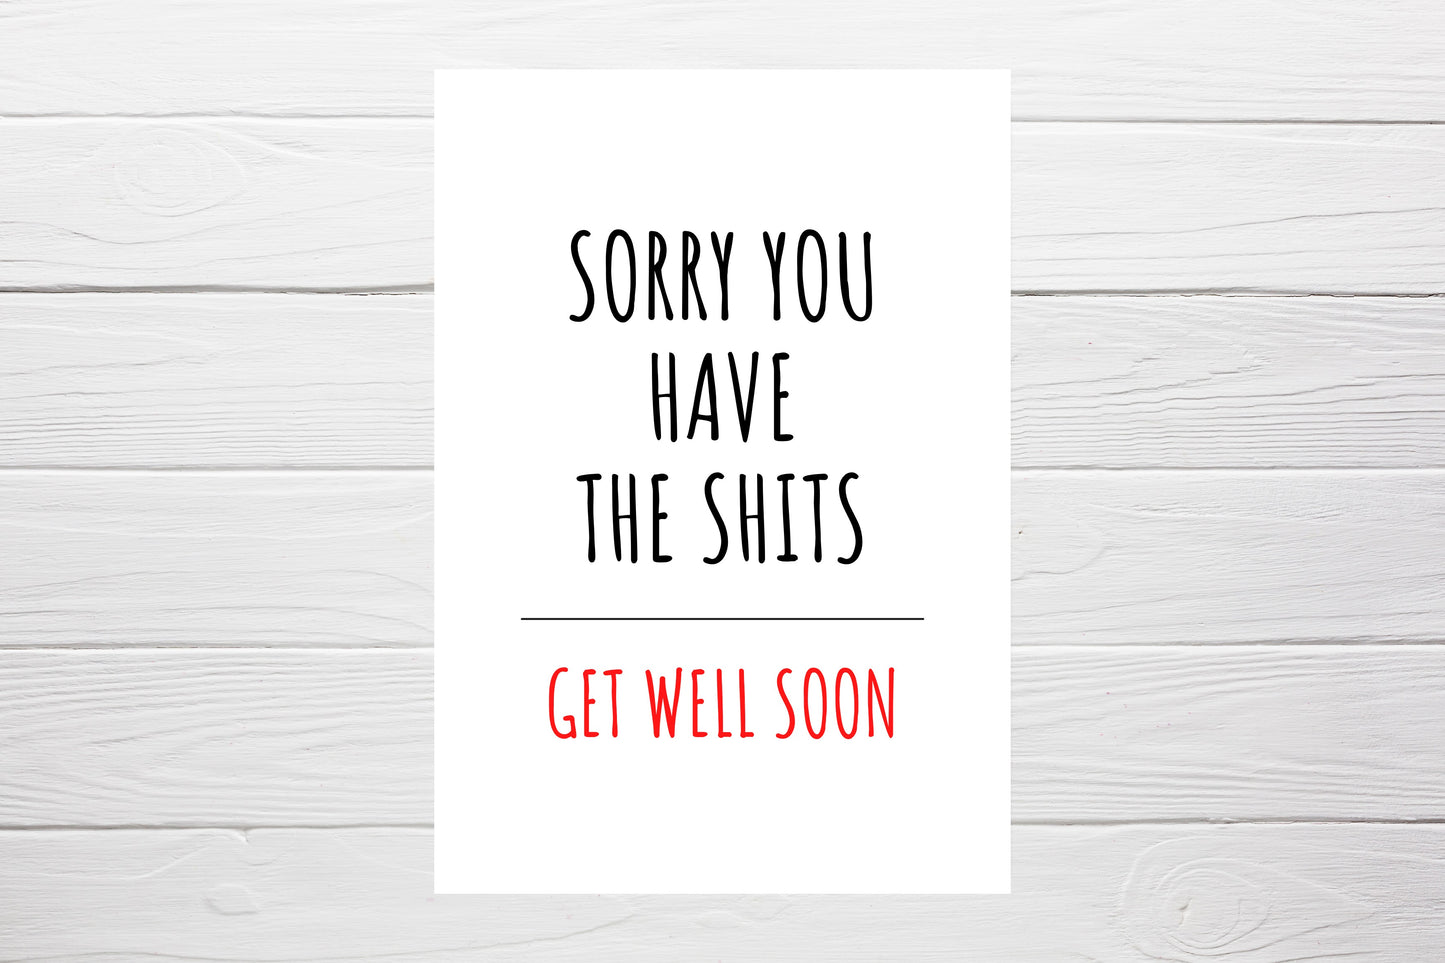 Thinking Of You Card | Sorry You Have The Shits | Funny Card | Get Well Soon Card | Banter Card